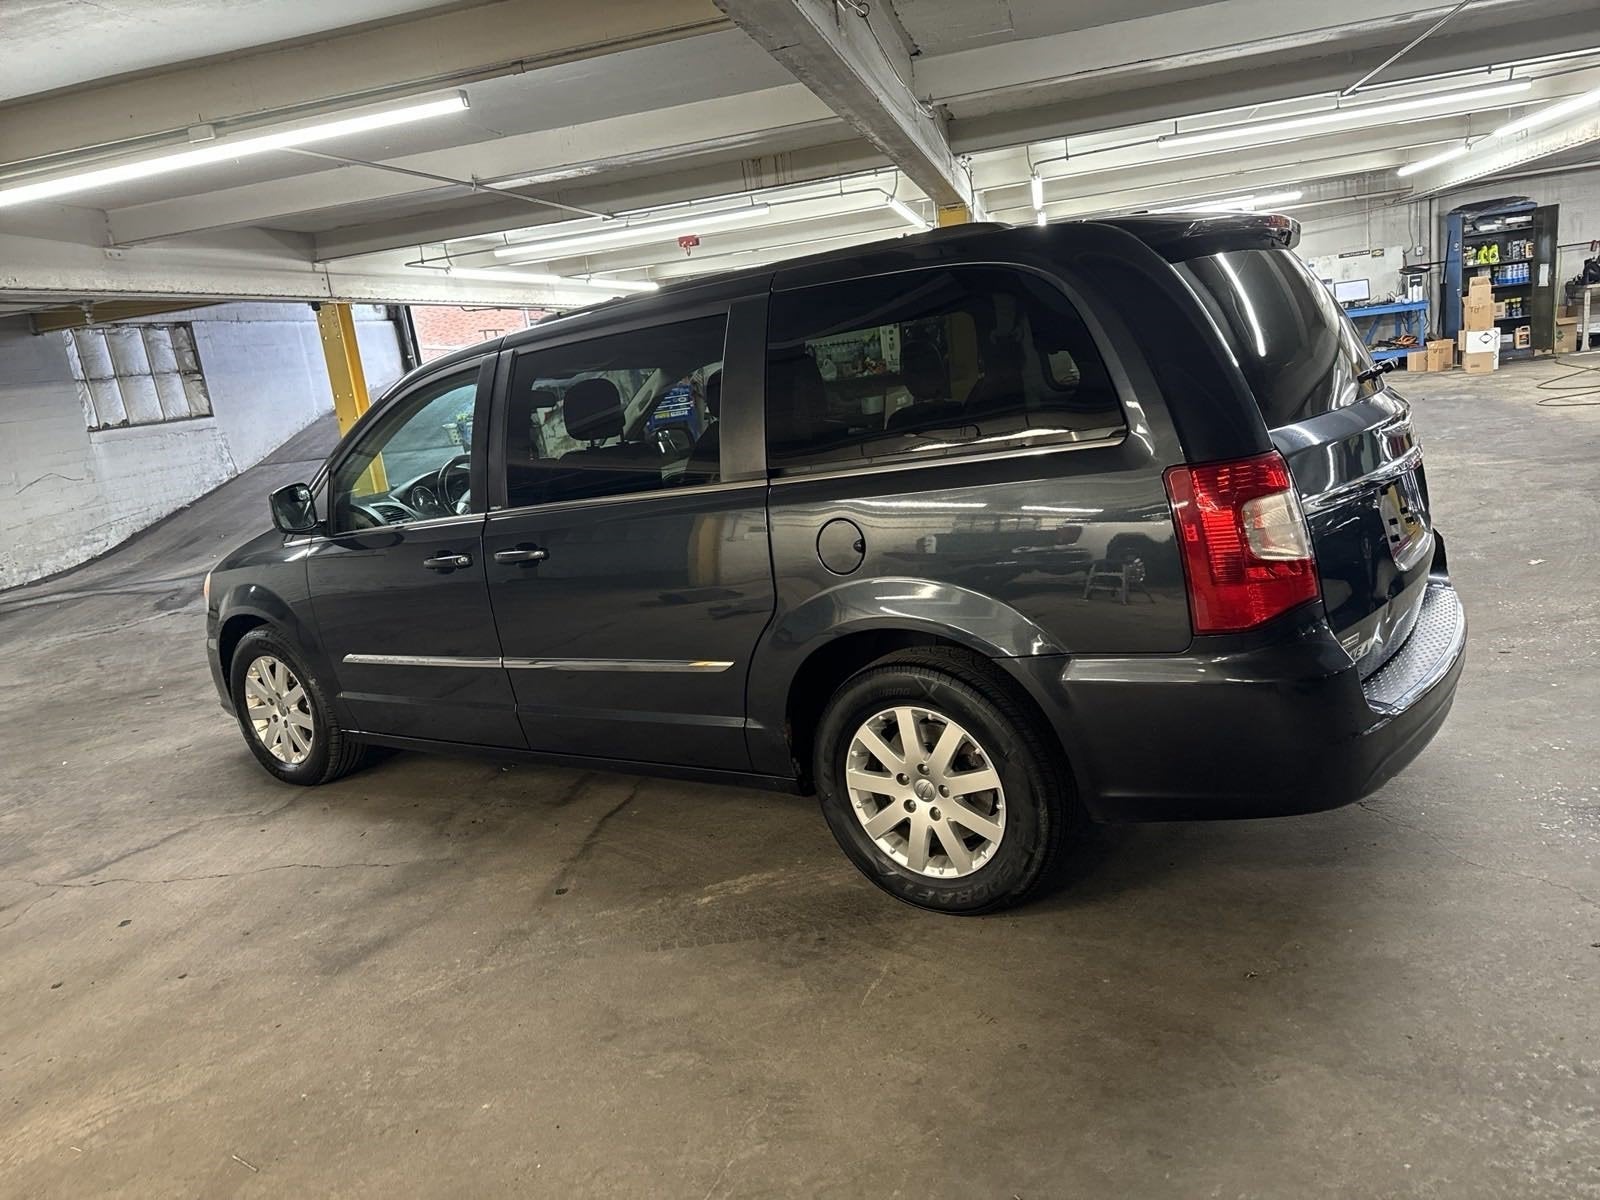 2014 Chrysler TOWN & COUNTRY TOURING